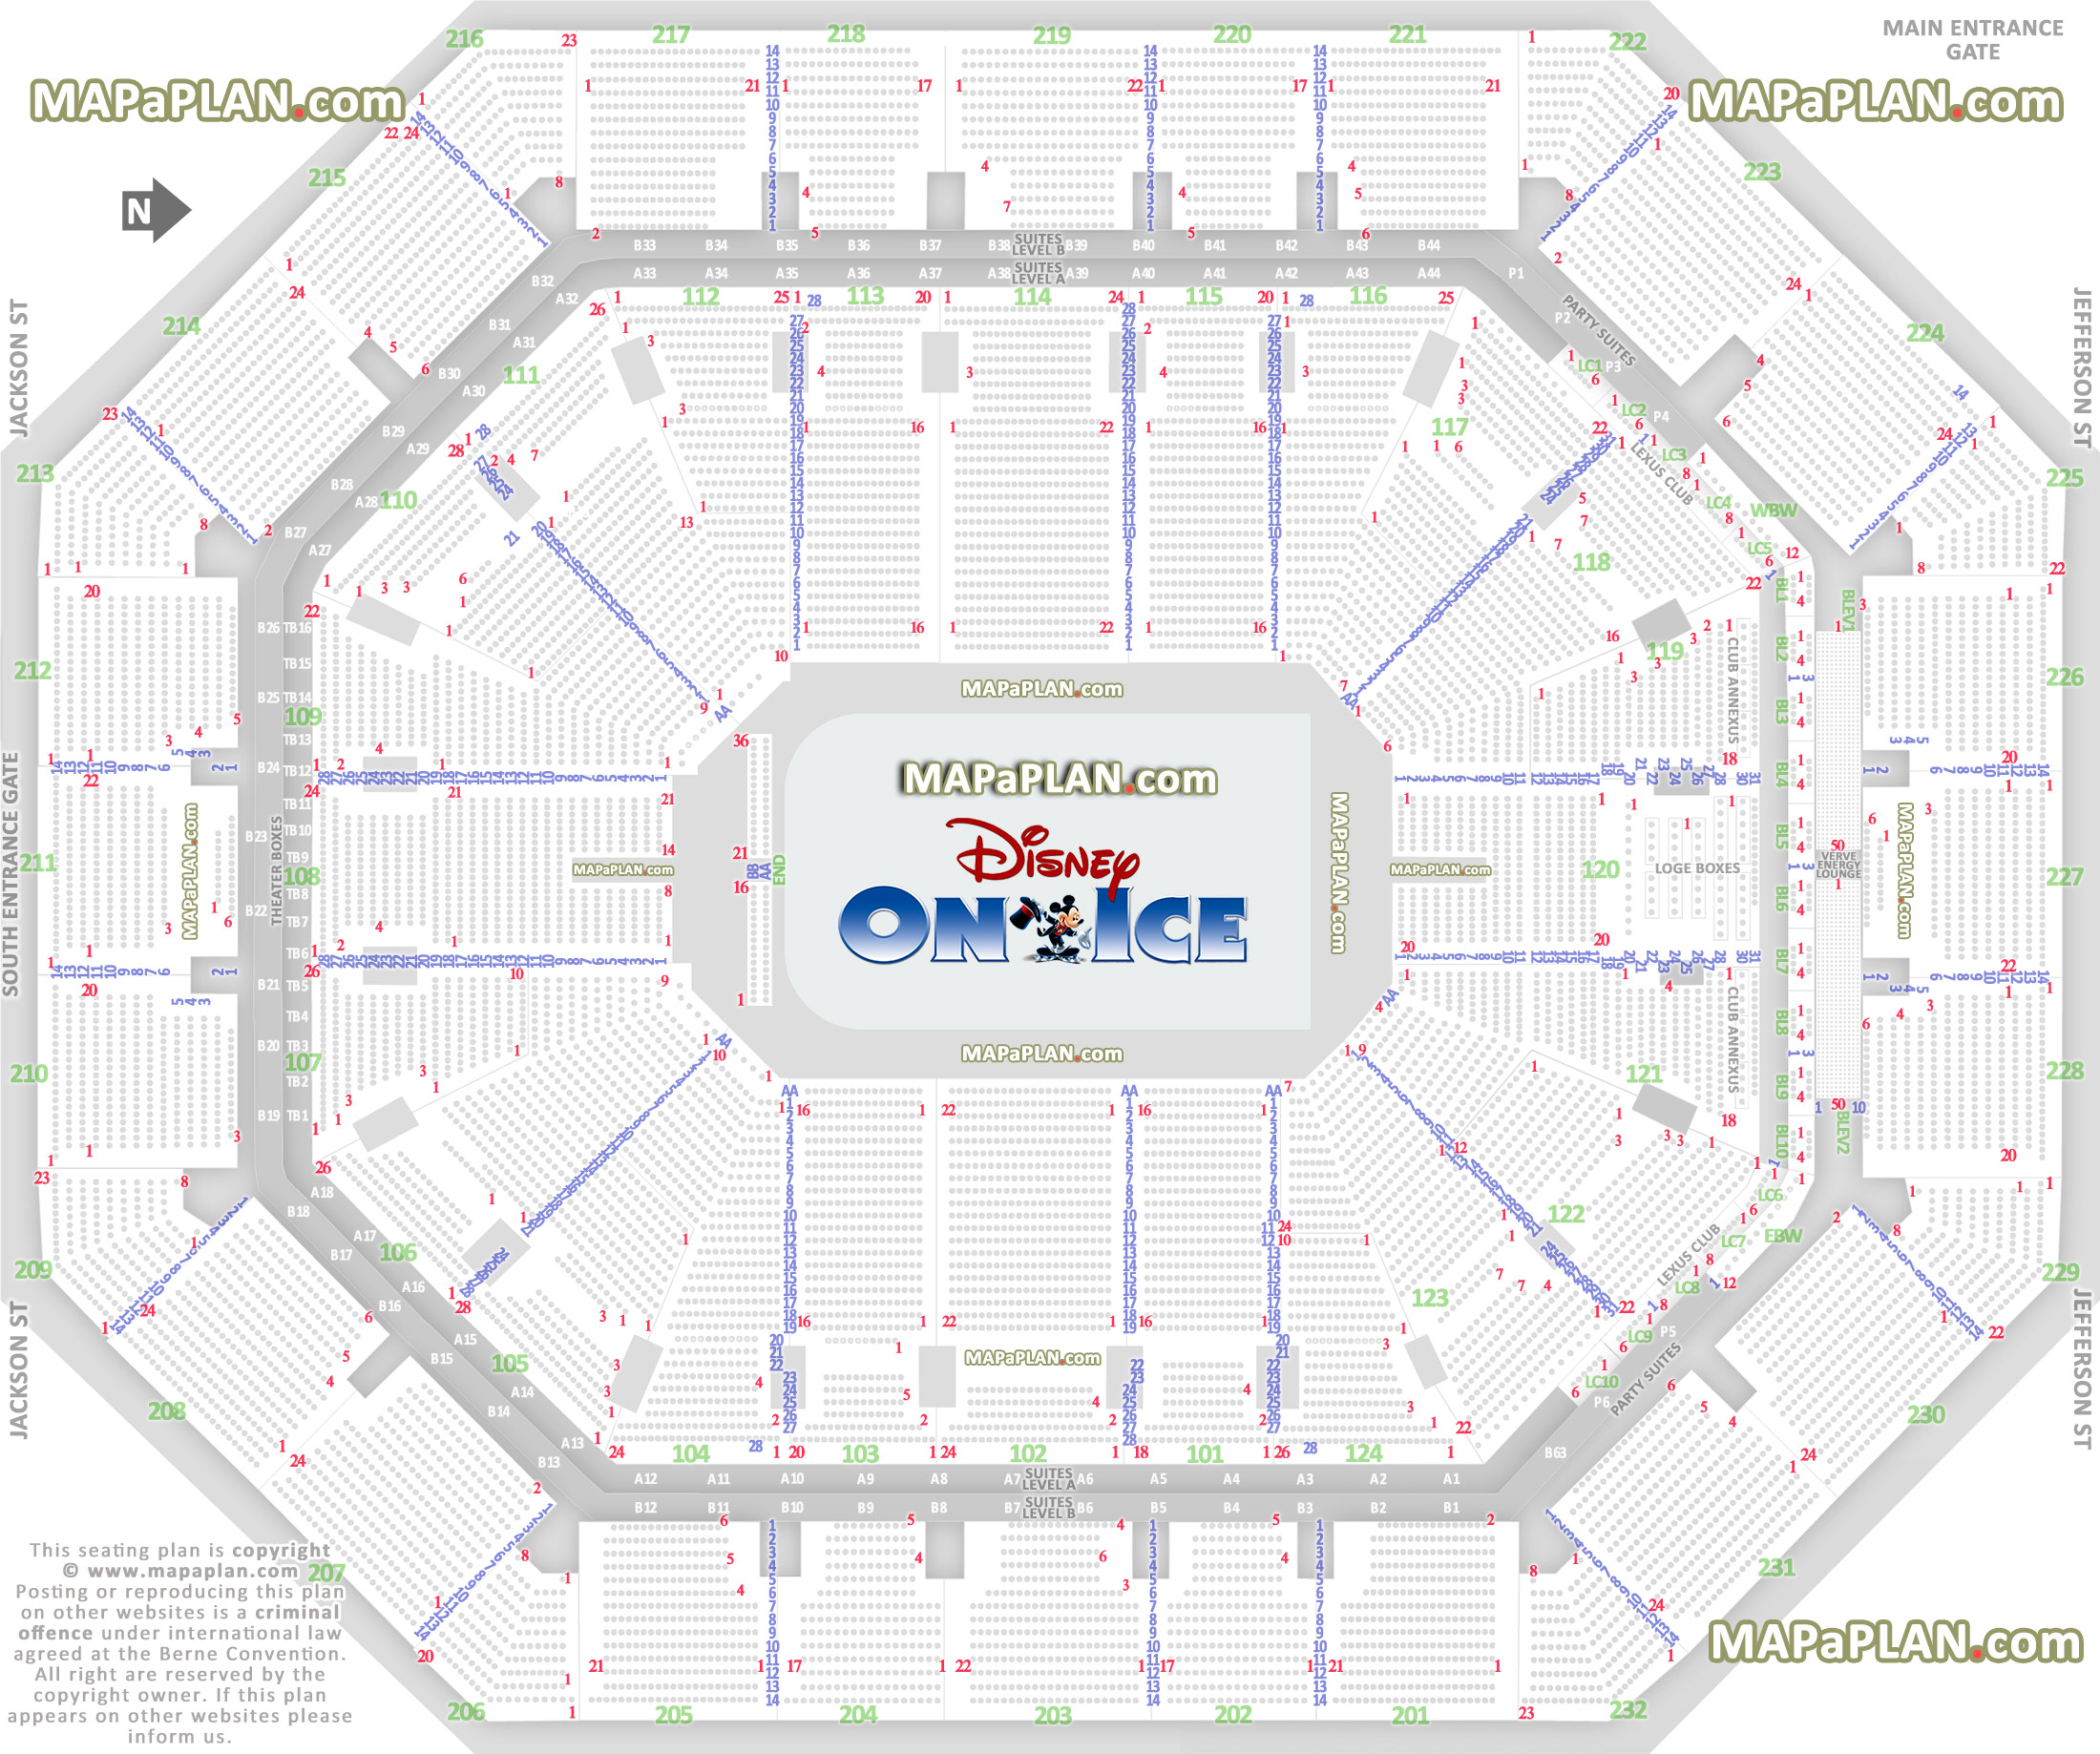 disney ice live printable virtual information guide full exact row letters numbers plan aa bb 1 2 3 4 5 6 7 8 9 10 11 12 13 14 15 16 17 18 19 20 21 22 23 24 25 26 27 28 29 30 Phoenix Footprint Center Arena seating chart